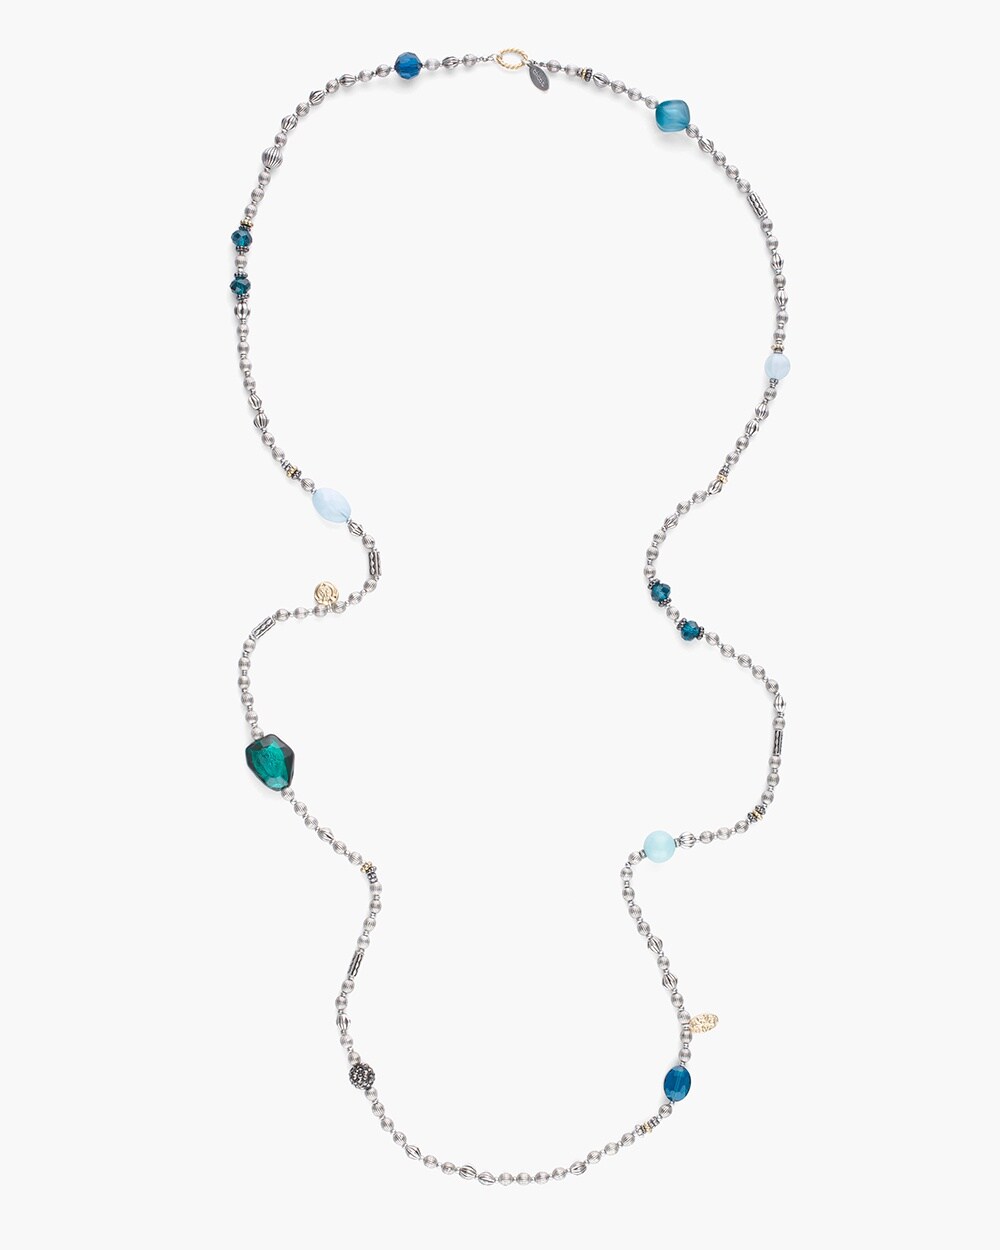 Teal Stone Single-Strand Necklace